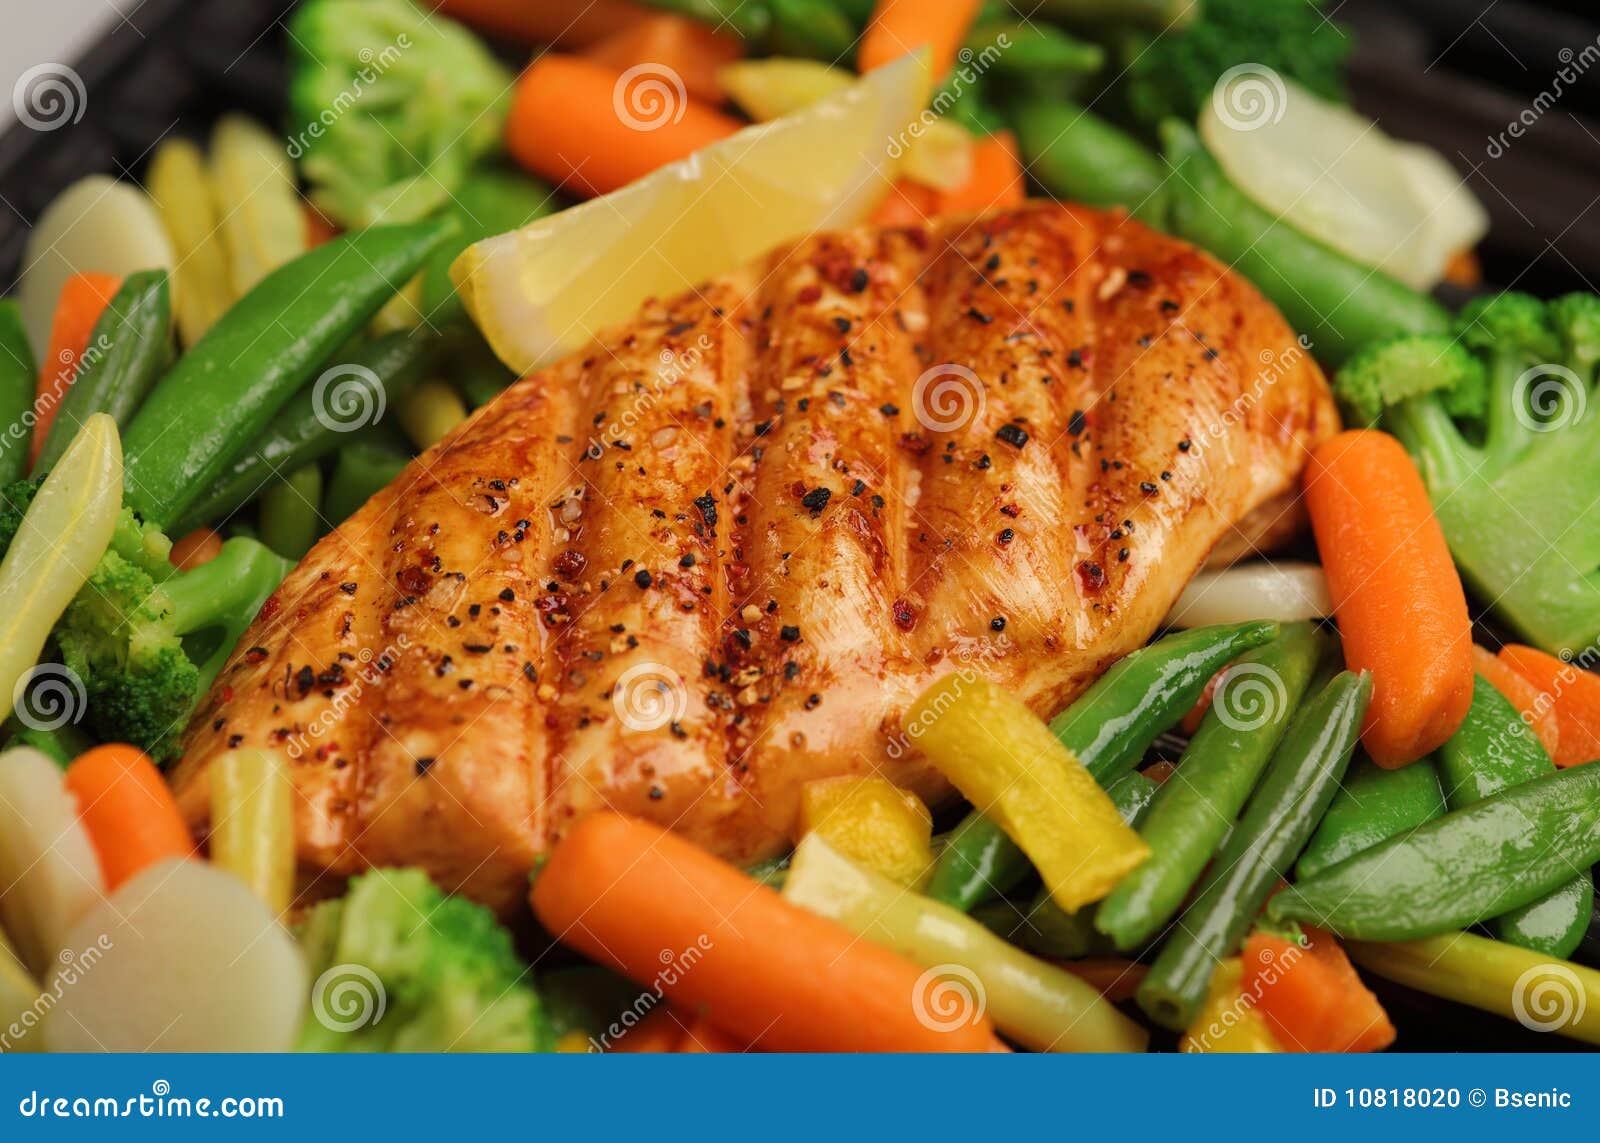 Grilled Chicken with Fresh Vegetables Stock Photo - Image of cooking ...